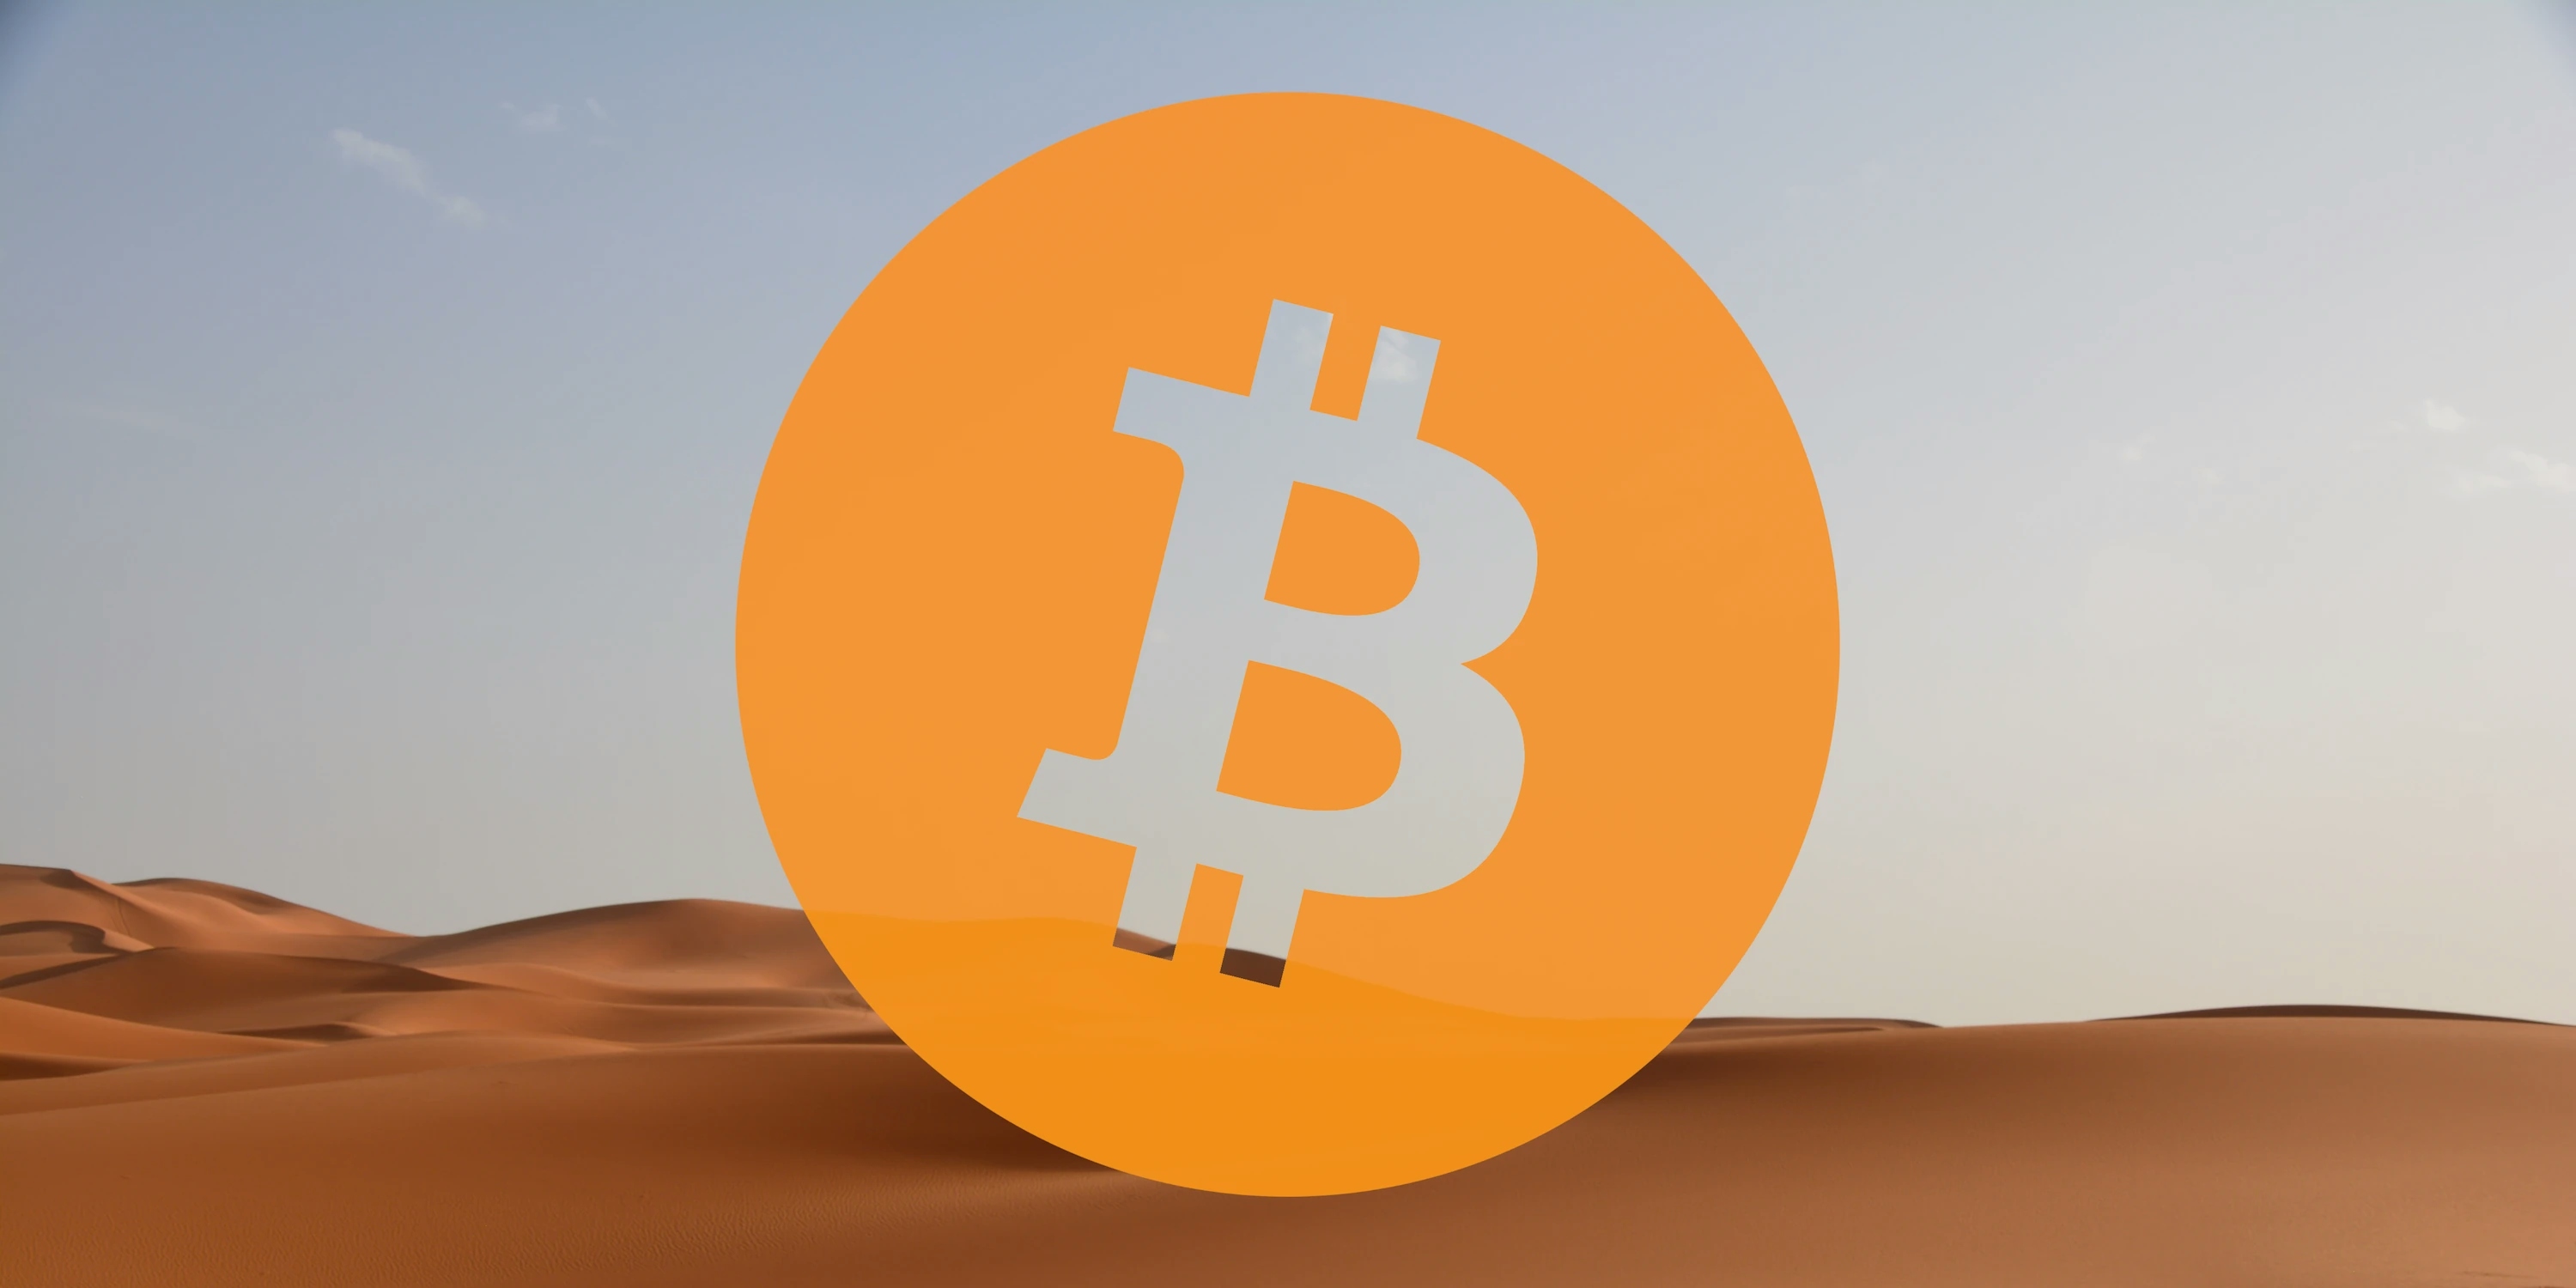 Bitcoin logo overlaid on a desert picture